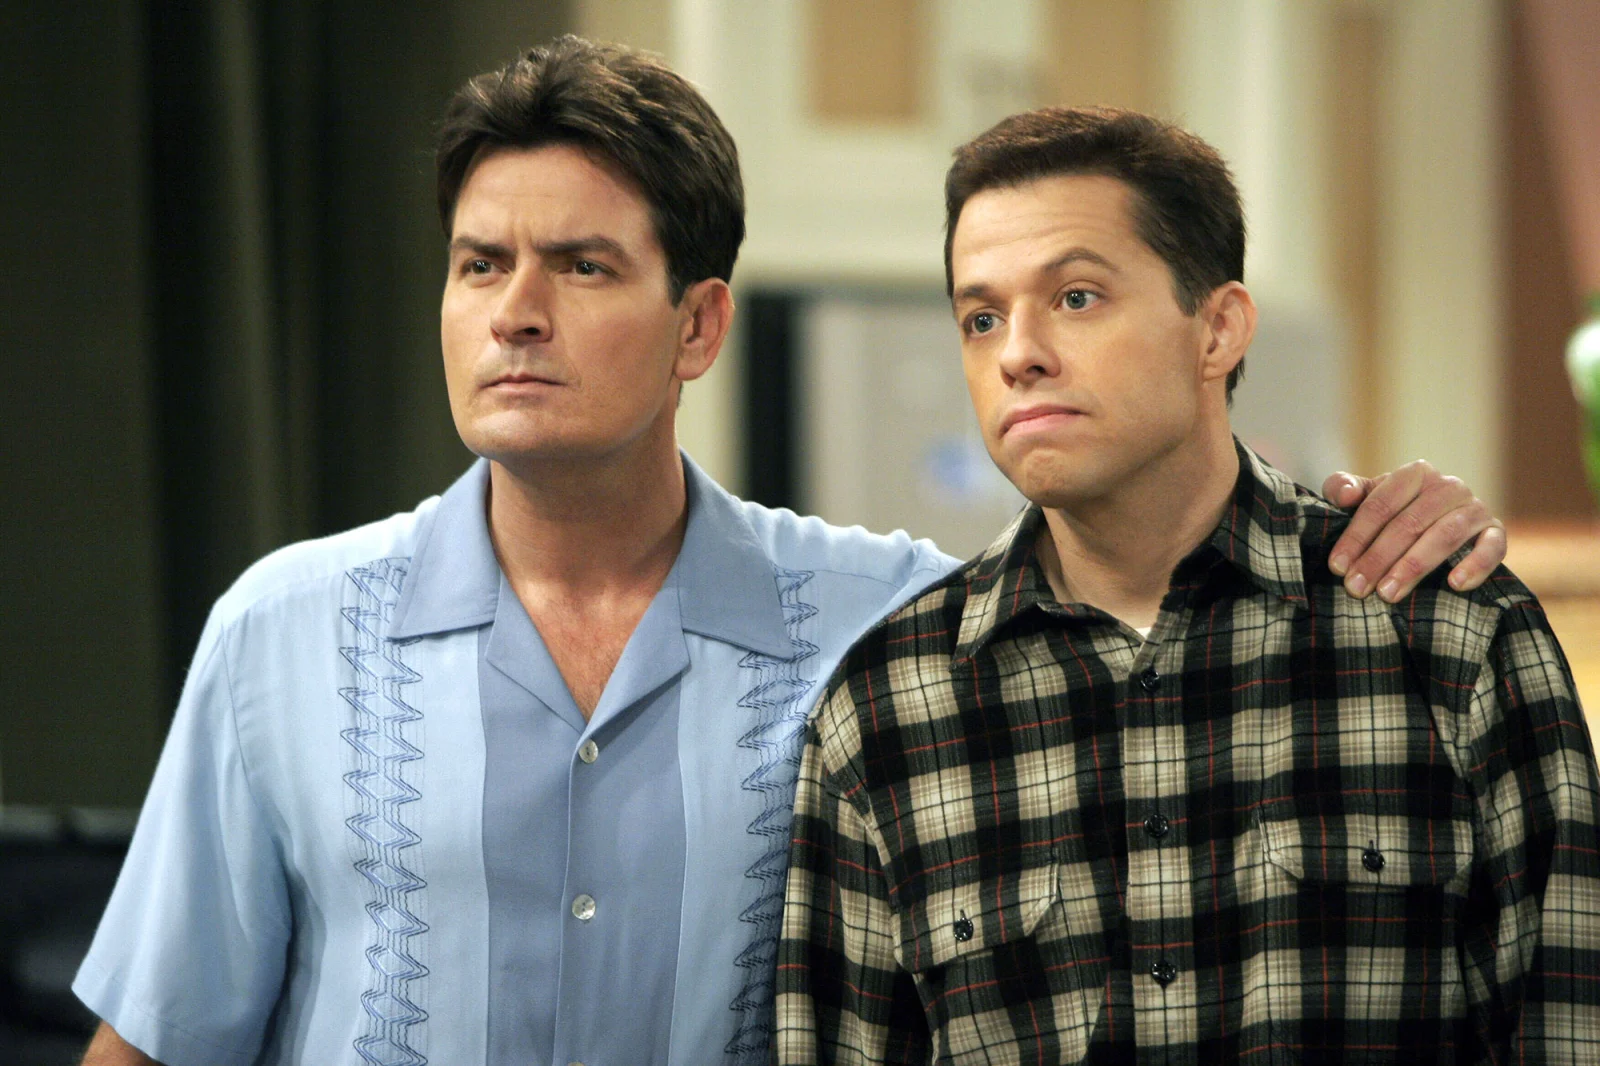 Charlie Sheen and Jon Cryer 